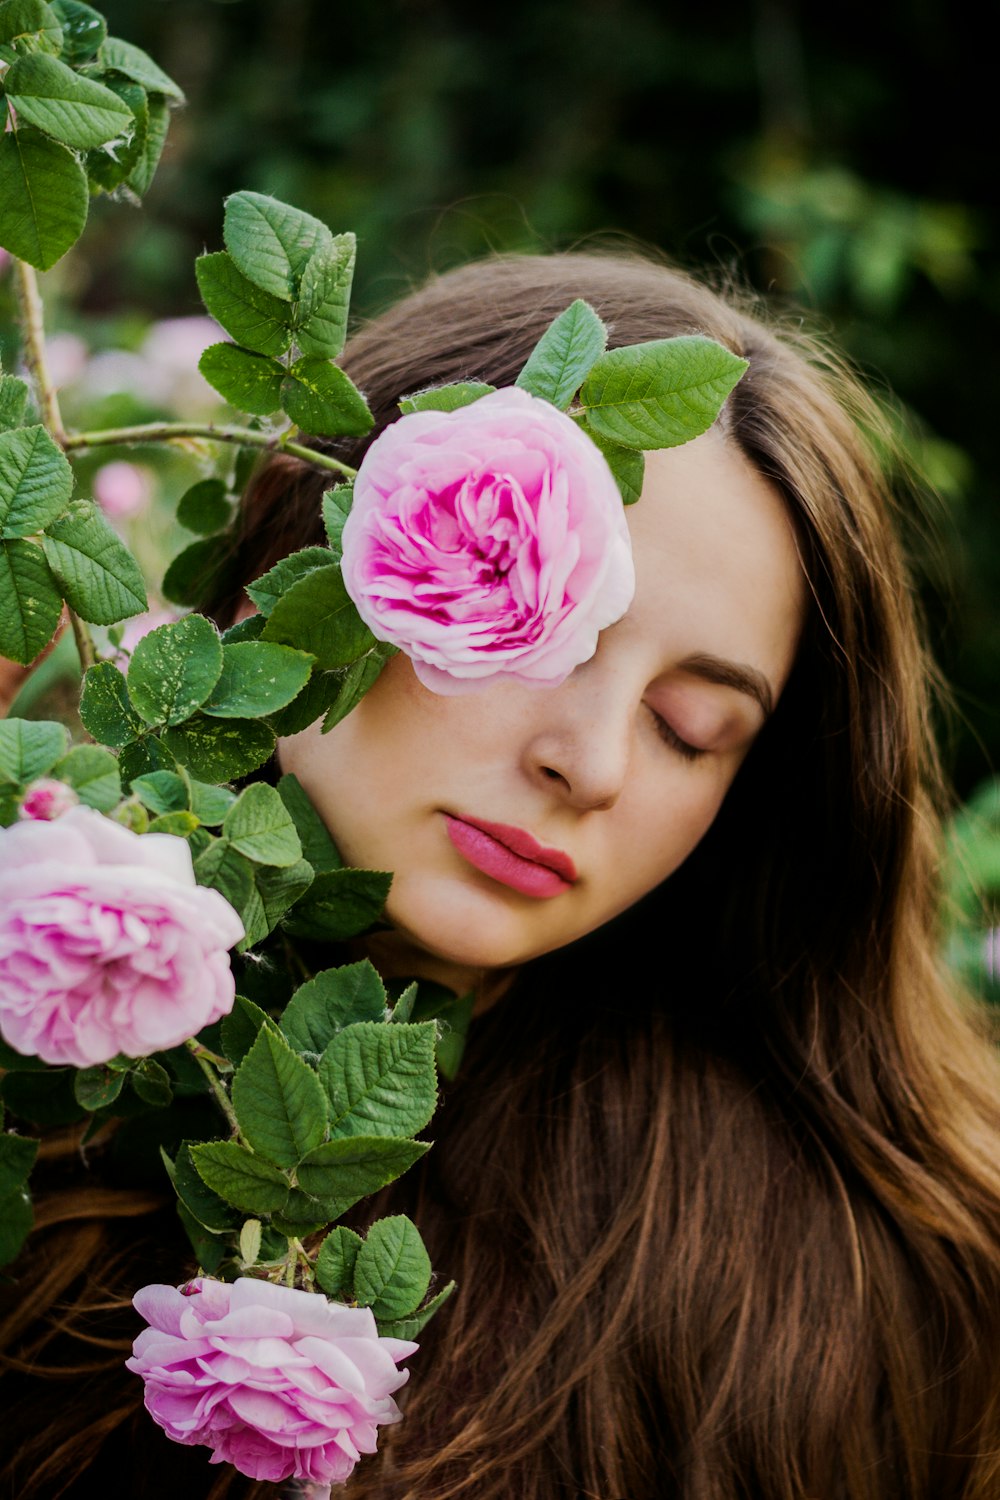 woman hiding behind pink petaled flower during daytime